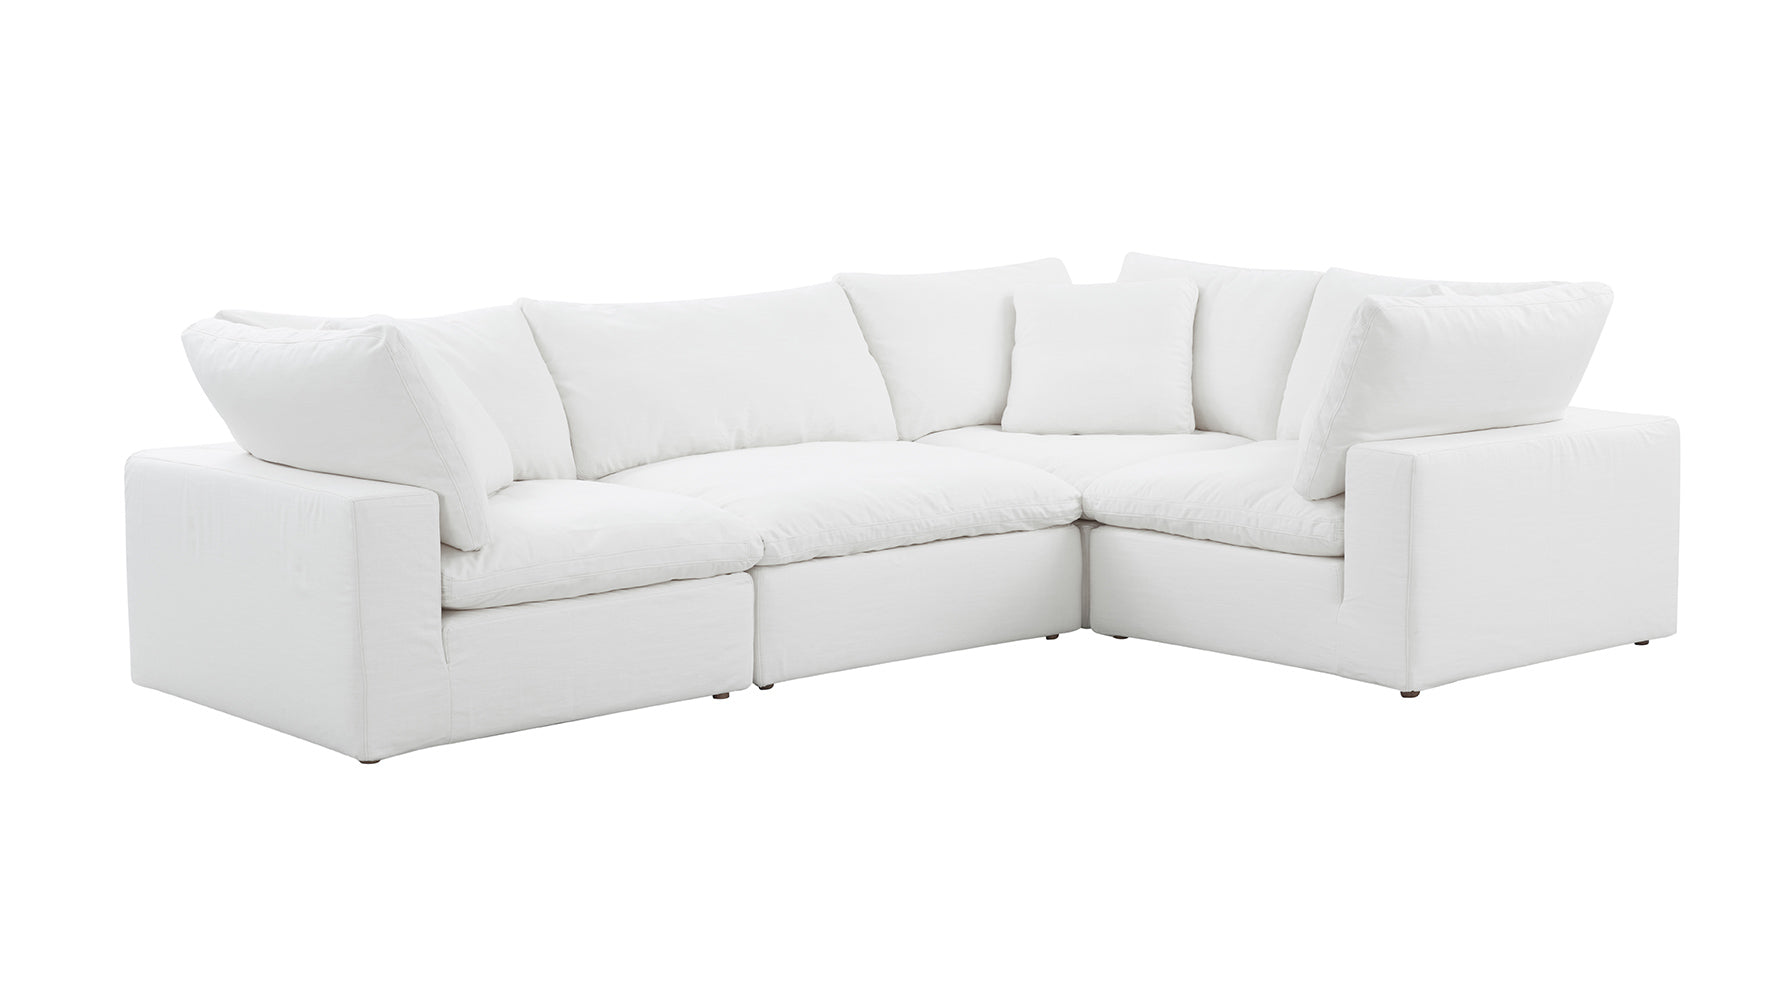 Movie Night™ 4-Piece Modular Sectional Closed, Standard, Brie - Image 4